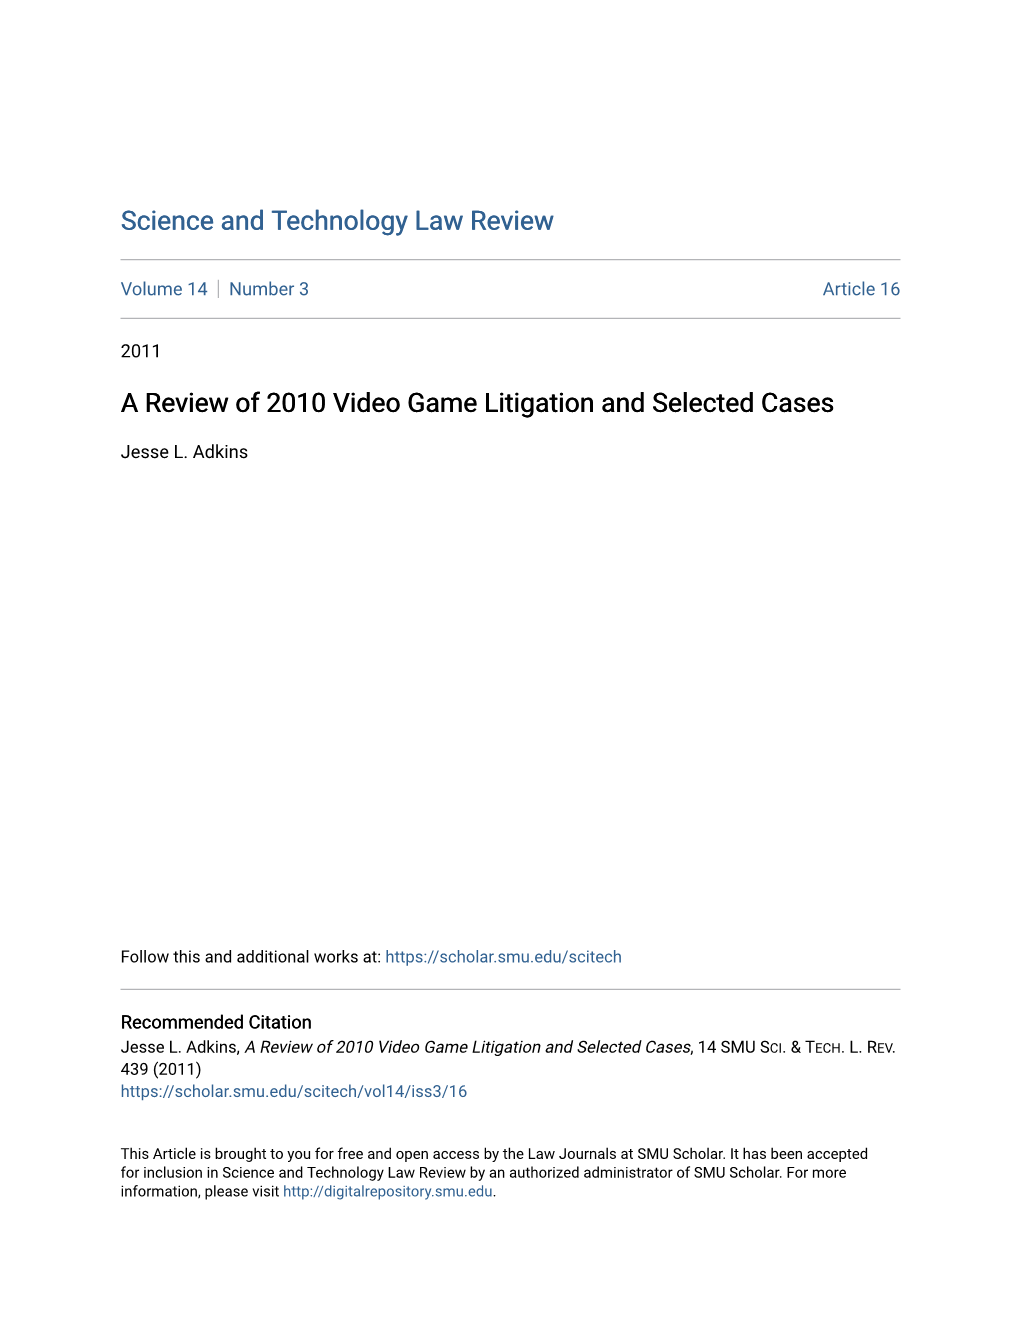 A Review of 2010 Video Game Litigation and Selected Cases